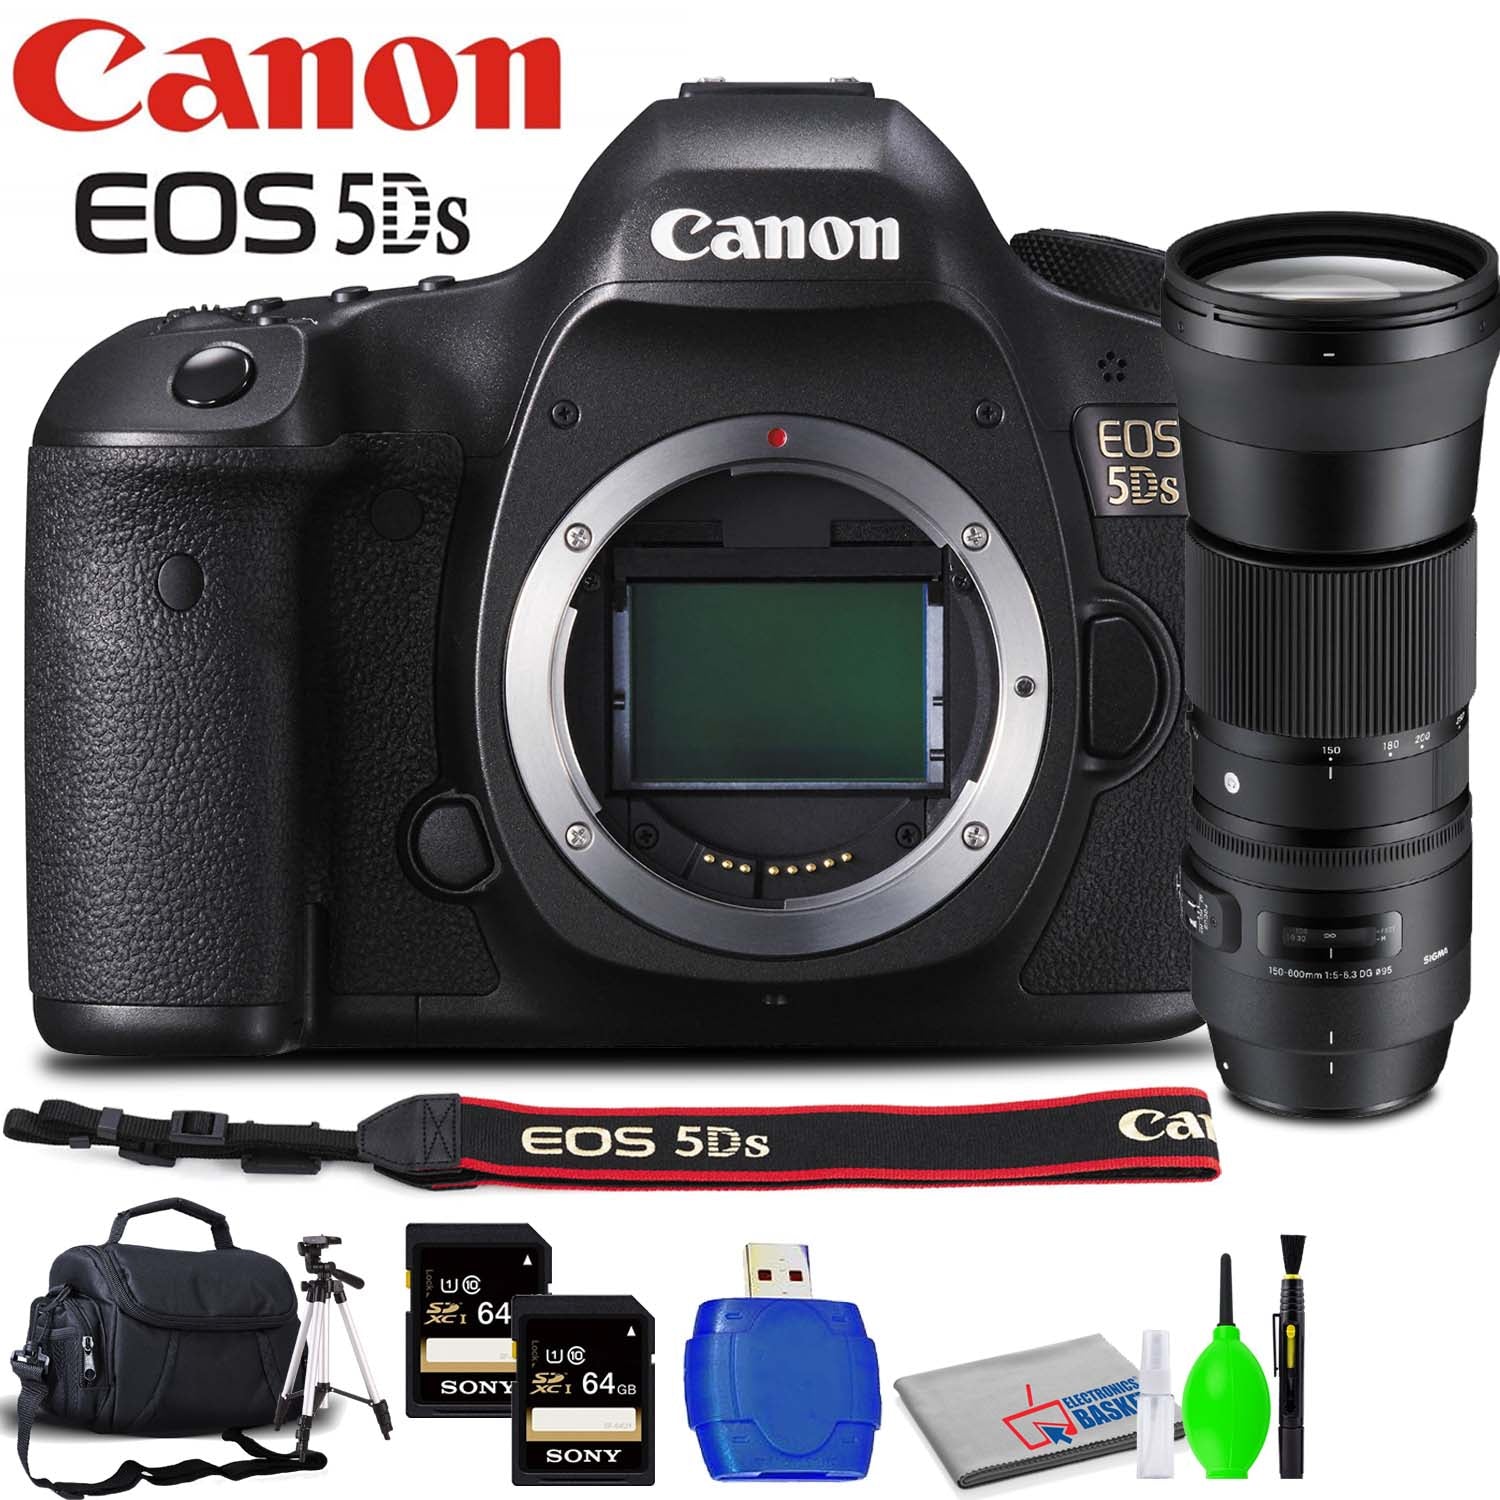 Canon EOS 5DS DSLR Camera (Body Only) Accessory Bundle with Sigma 150-600mm f/5-6.3 Lens, Memory Card Kit, Carrying Case